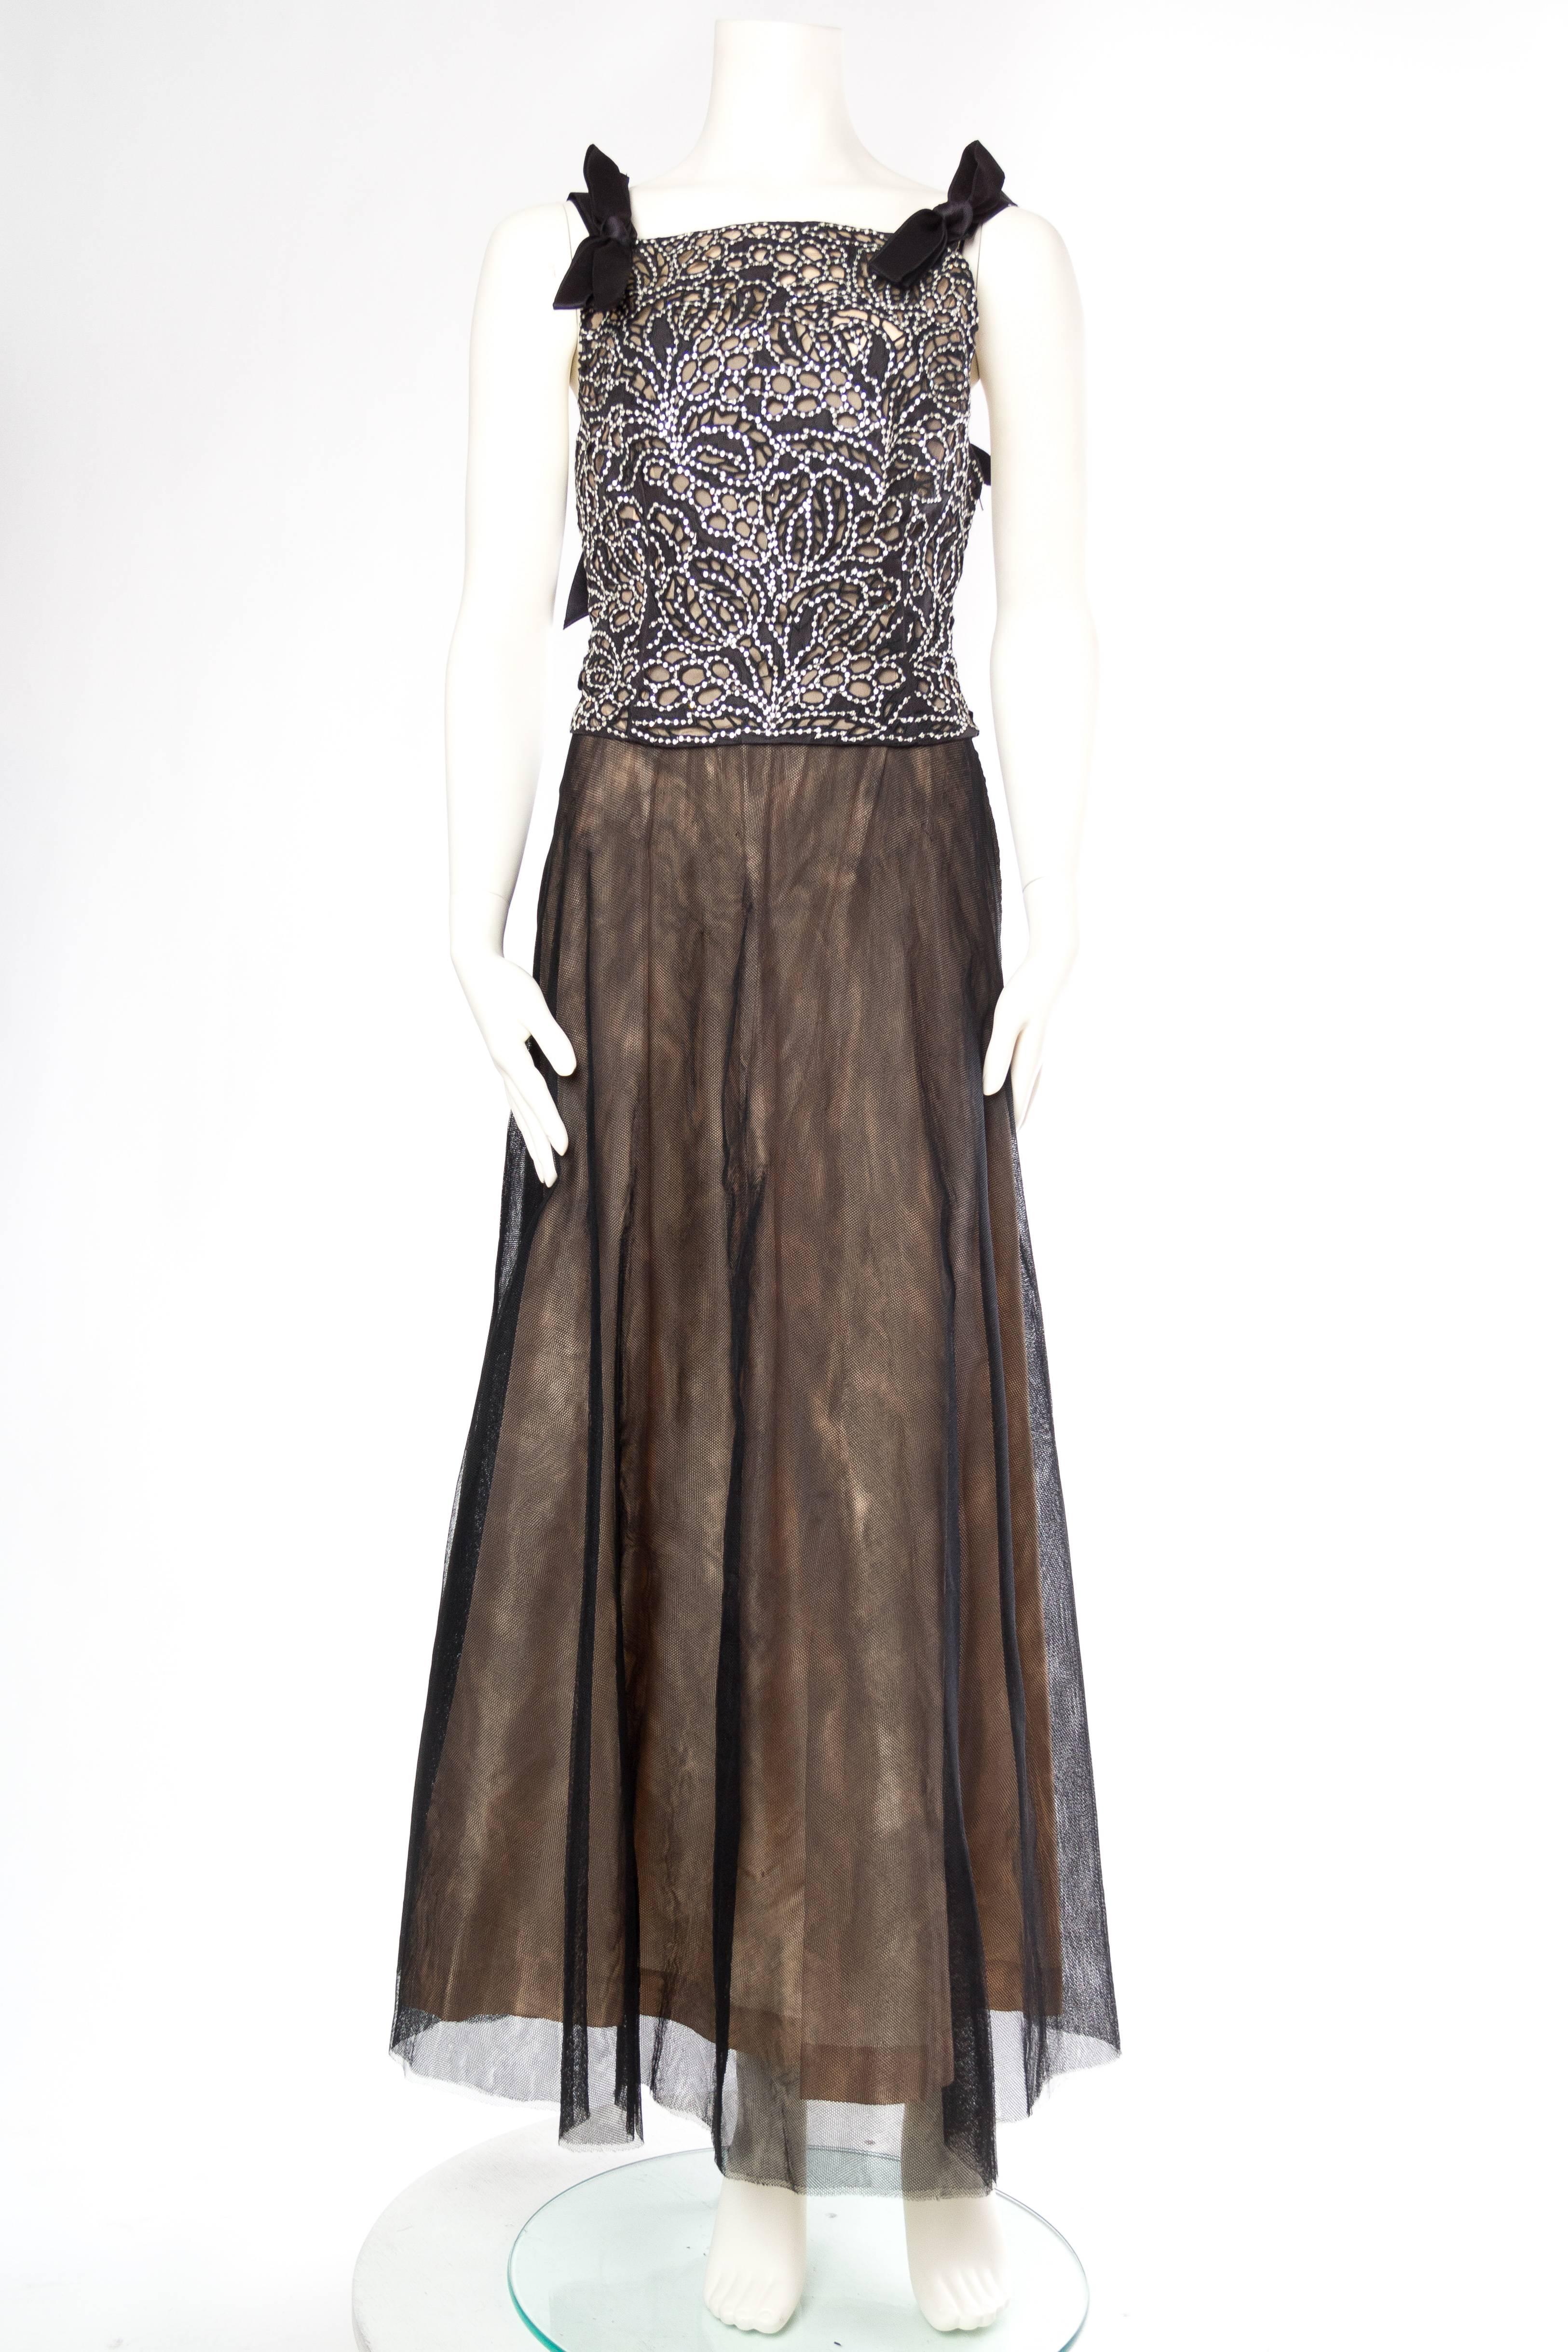 1980 VALENTINO Black Silk Tulle Couture Quality Gown With Lace And Crystal Bodi For Sale 2